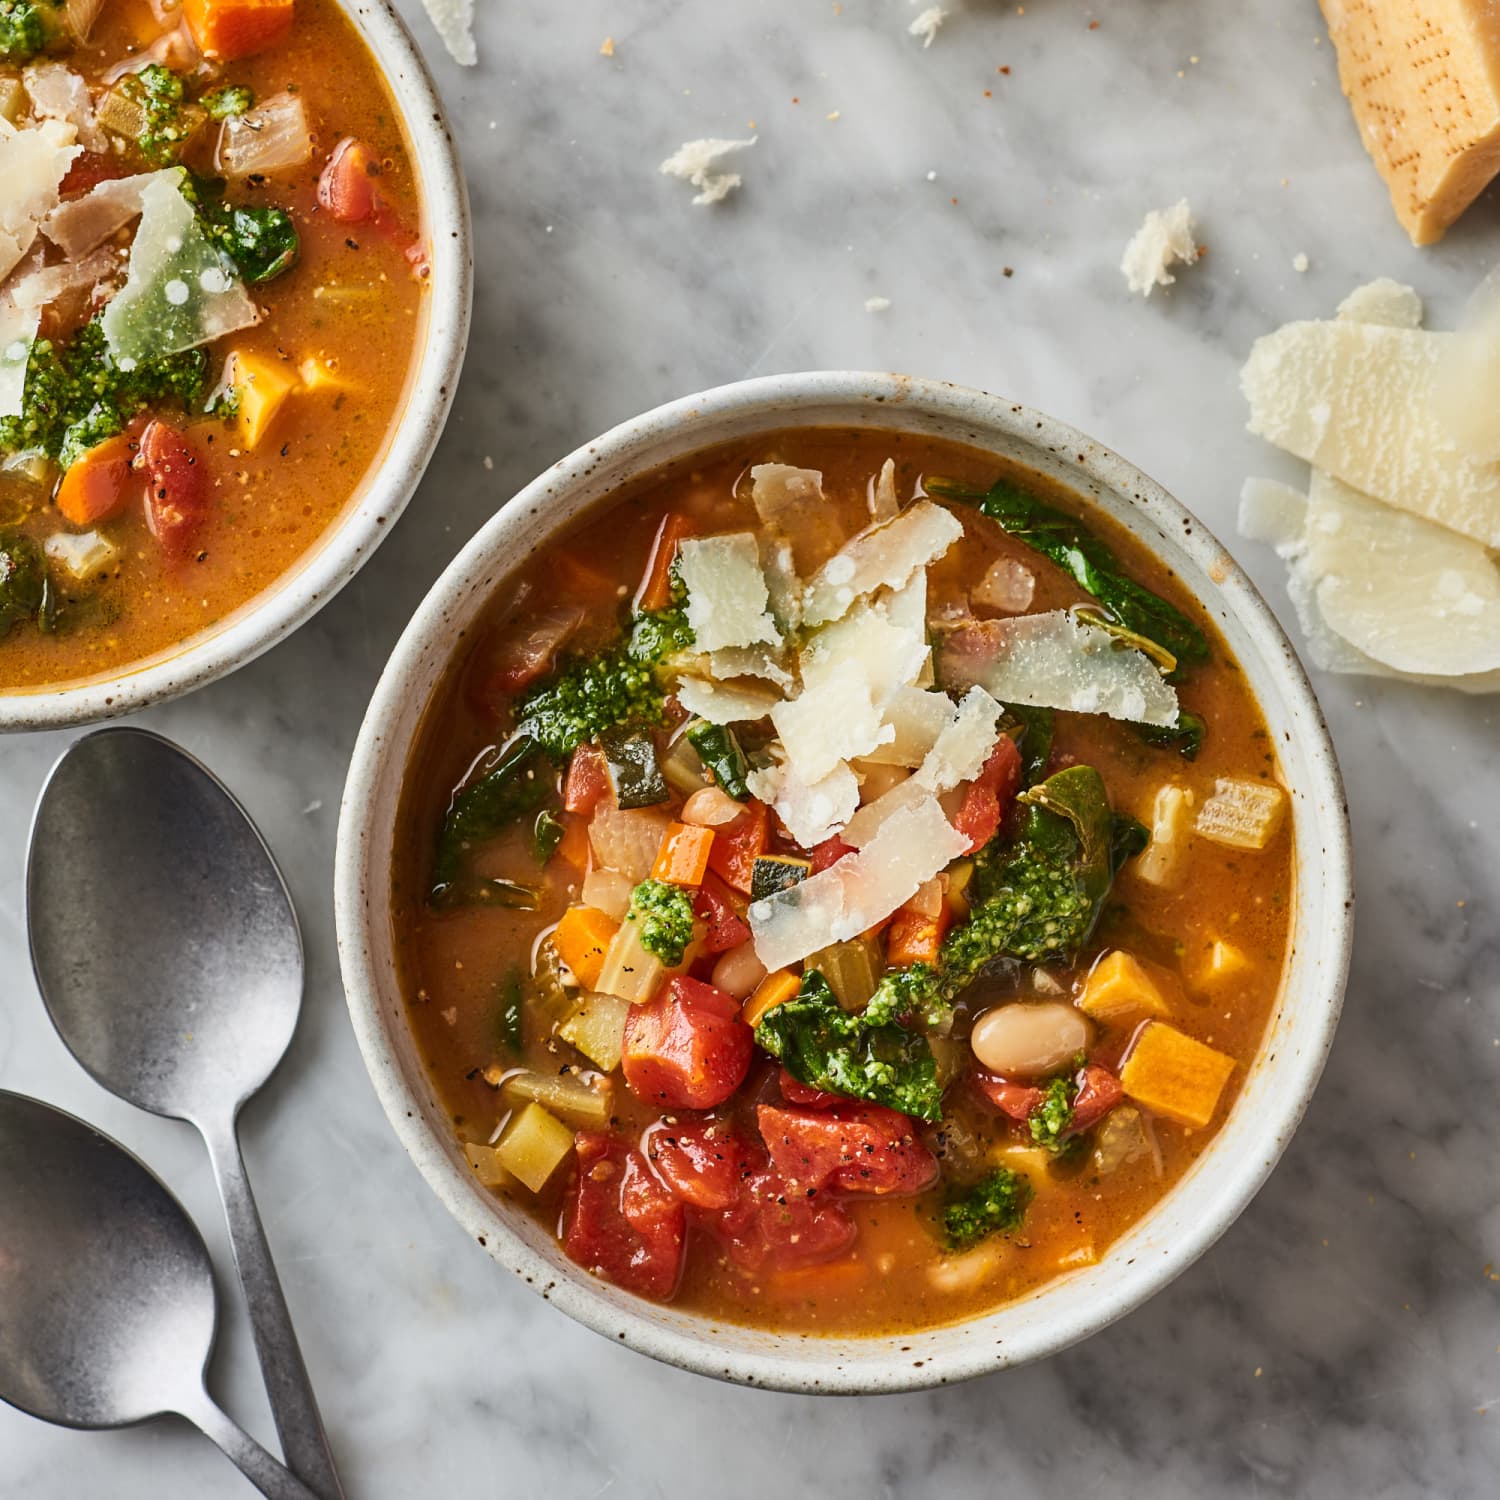 https://cdn.apartmenttherapy.info/image/upload/f_jpg,q_auto:eco,c_fill,g_auto,w_1500,ar_1:1/k%2FPhoto%2FRecipes%2F2019-12-How-To-Classic-Minestrone-Soup%2FHT-Classic-Minestrone-Soup_036